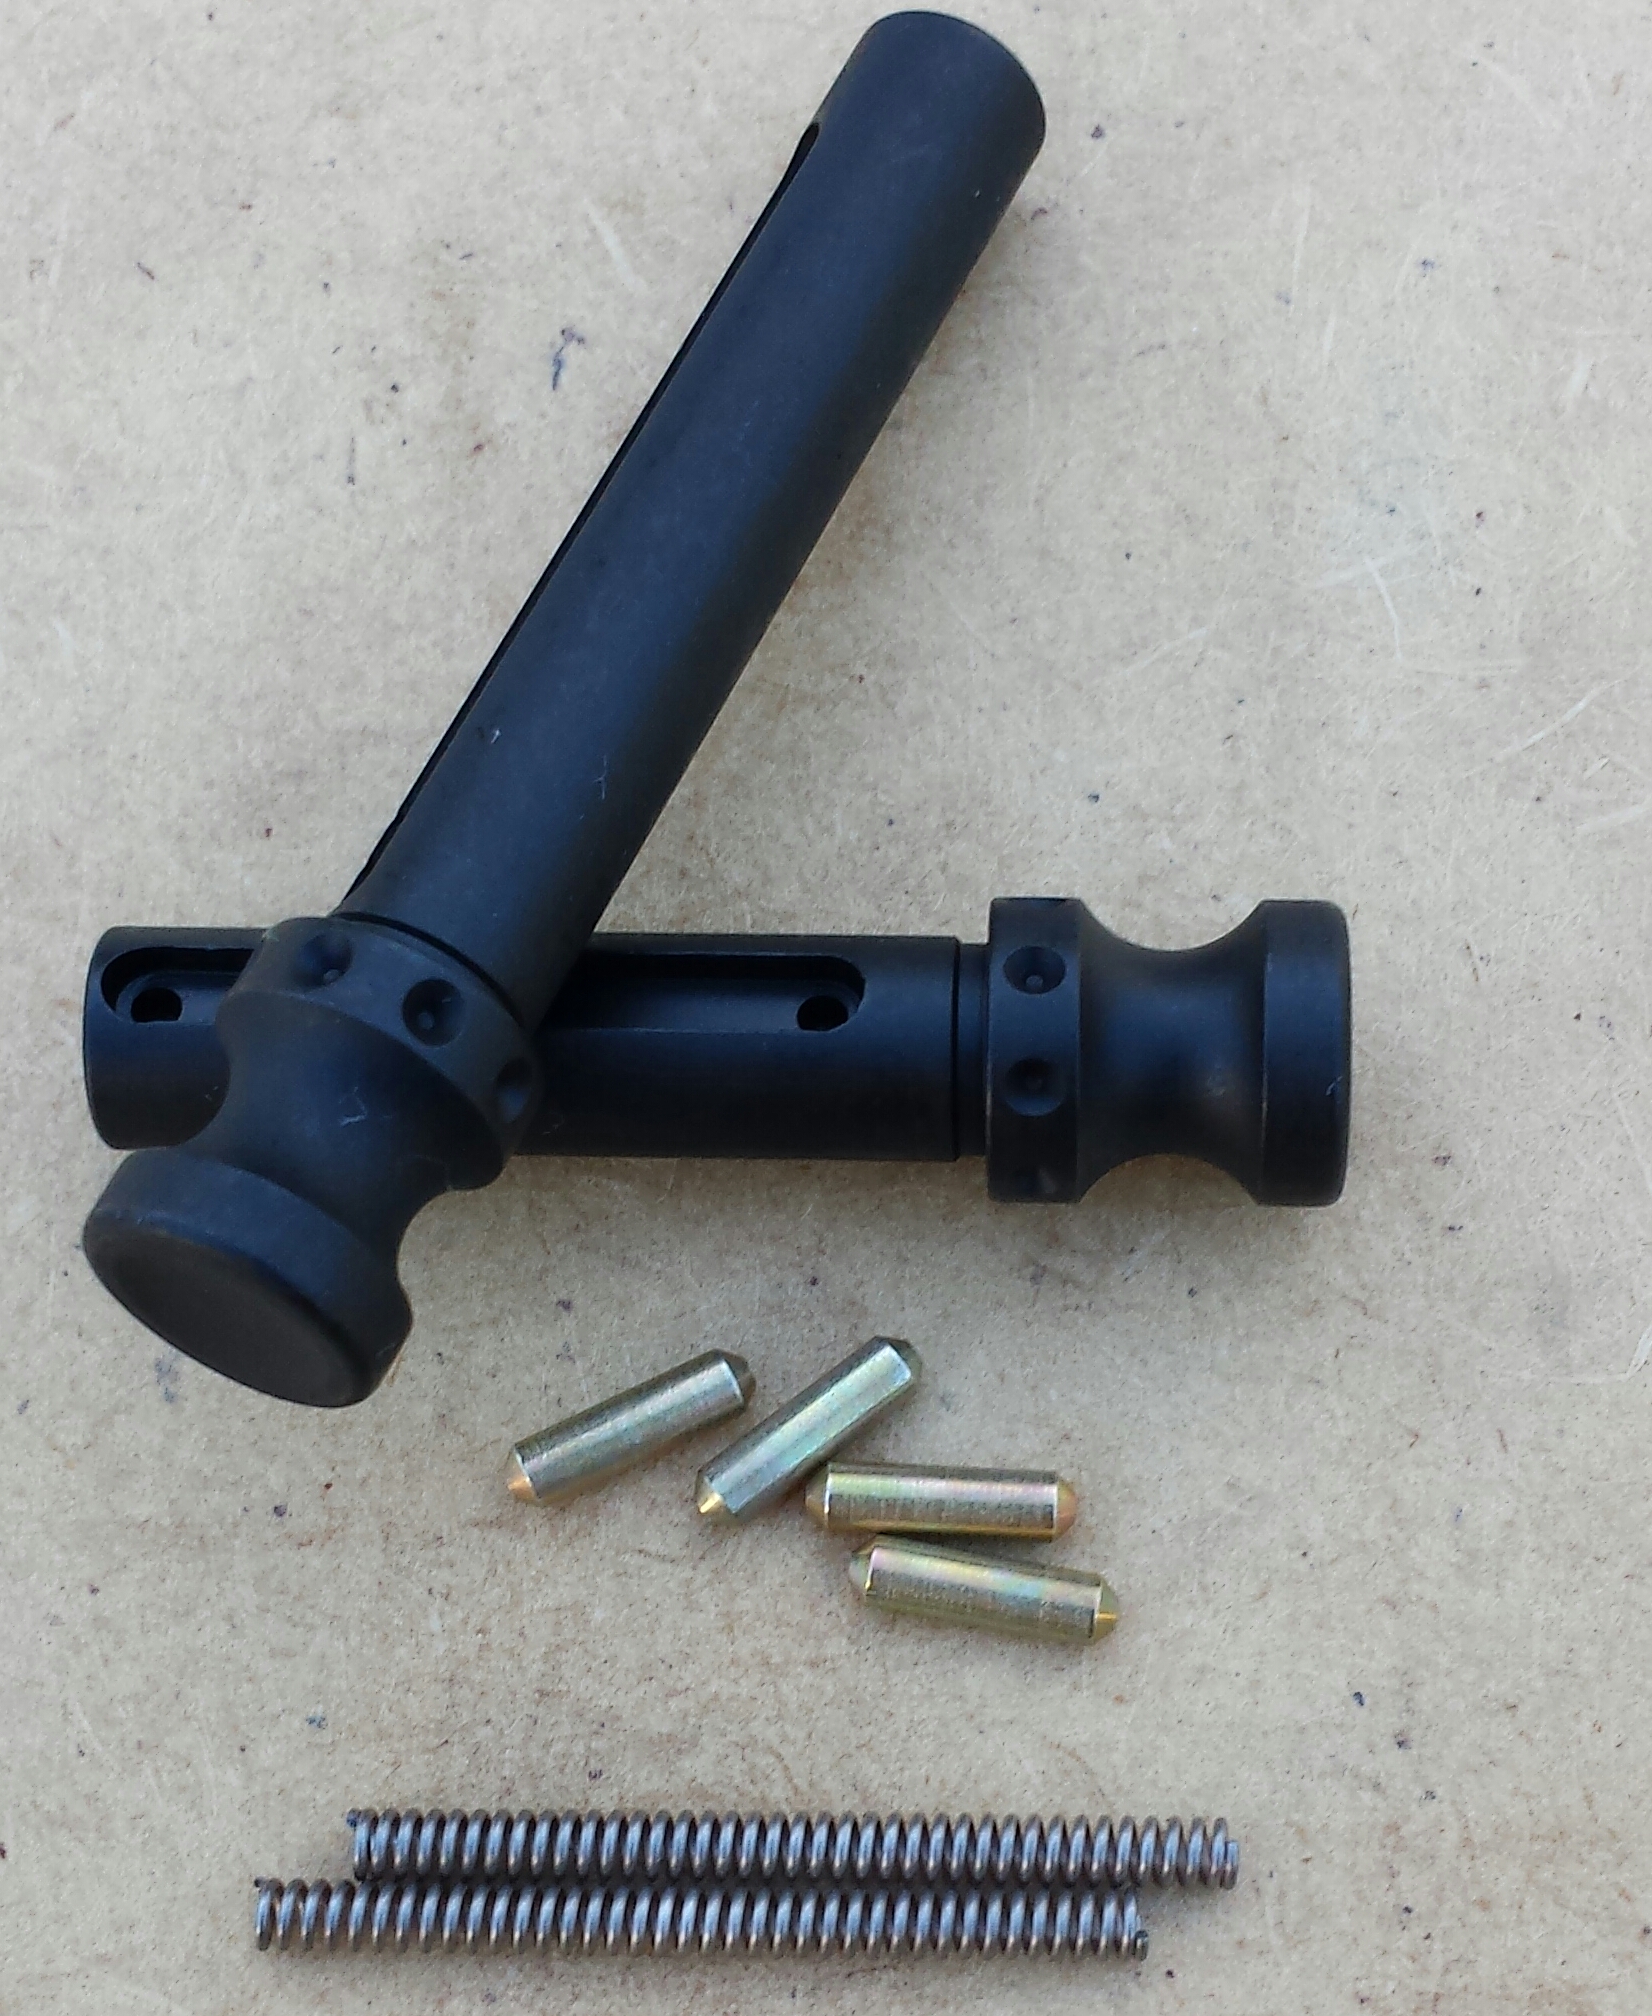 DPMS 308 Extended Pivot & Takedown, Detent Pins (4) and Springs (2)...